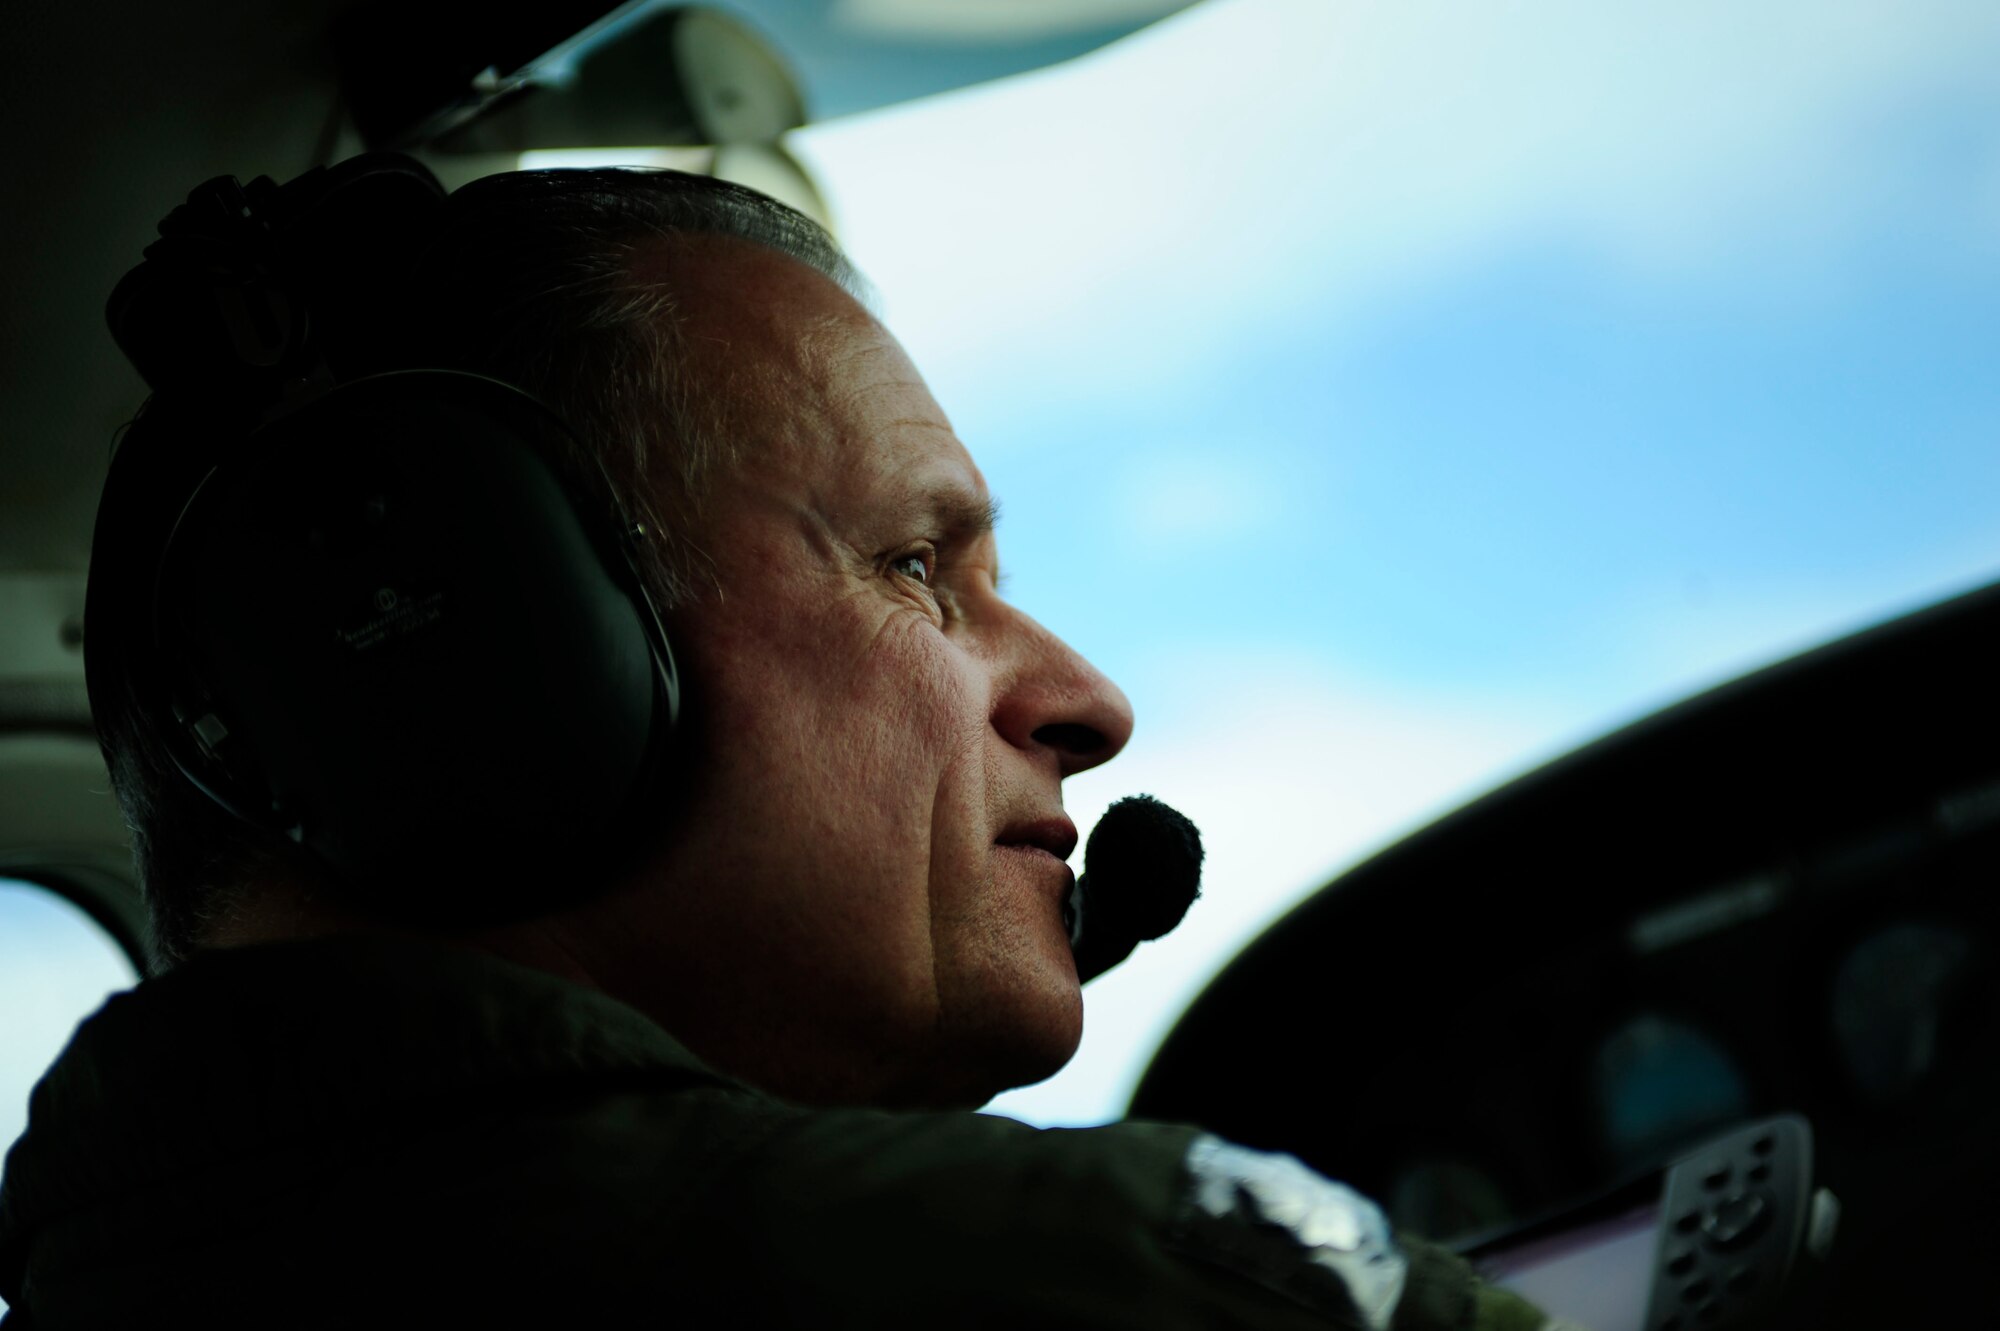 Lt. Col. Wayne Schulz, U.S. Air Force Auxiliary, Civil Air Patrol, Astoria, Ore., pilots a C-182 Cessna during Amalgam Dart 2009, June 18. Amalgam Dart is a field test of the Department of Defense's ability to rapidly deploy a total air integrated defense system in the U.S. in order to deter, detect and defeat airborne threats. (U.S. Air Force photo by Staff Sgt. Jacob N. Bailey)